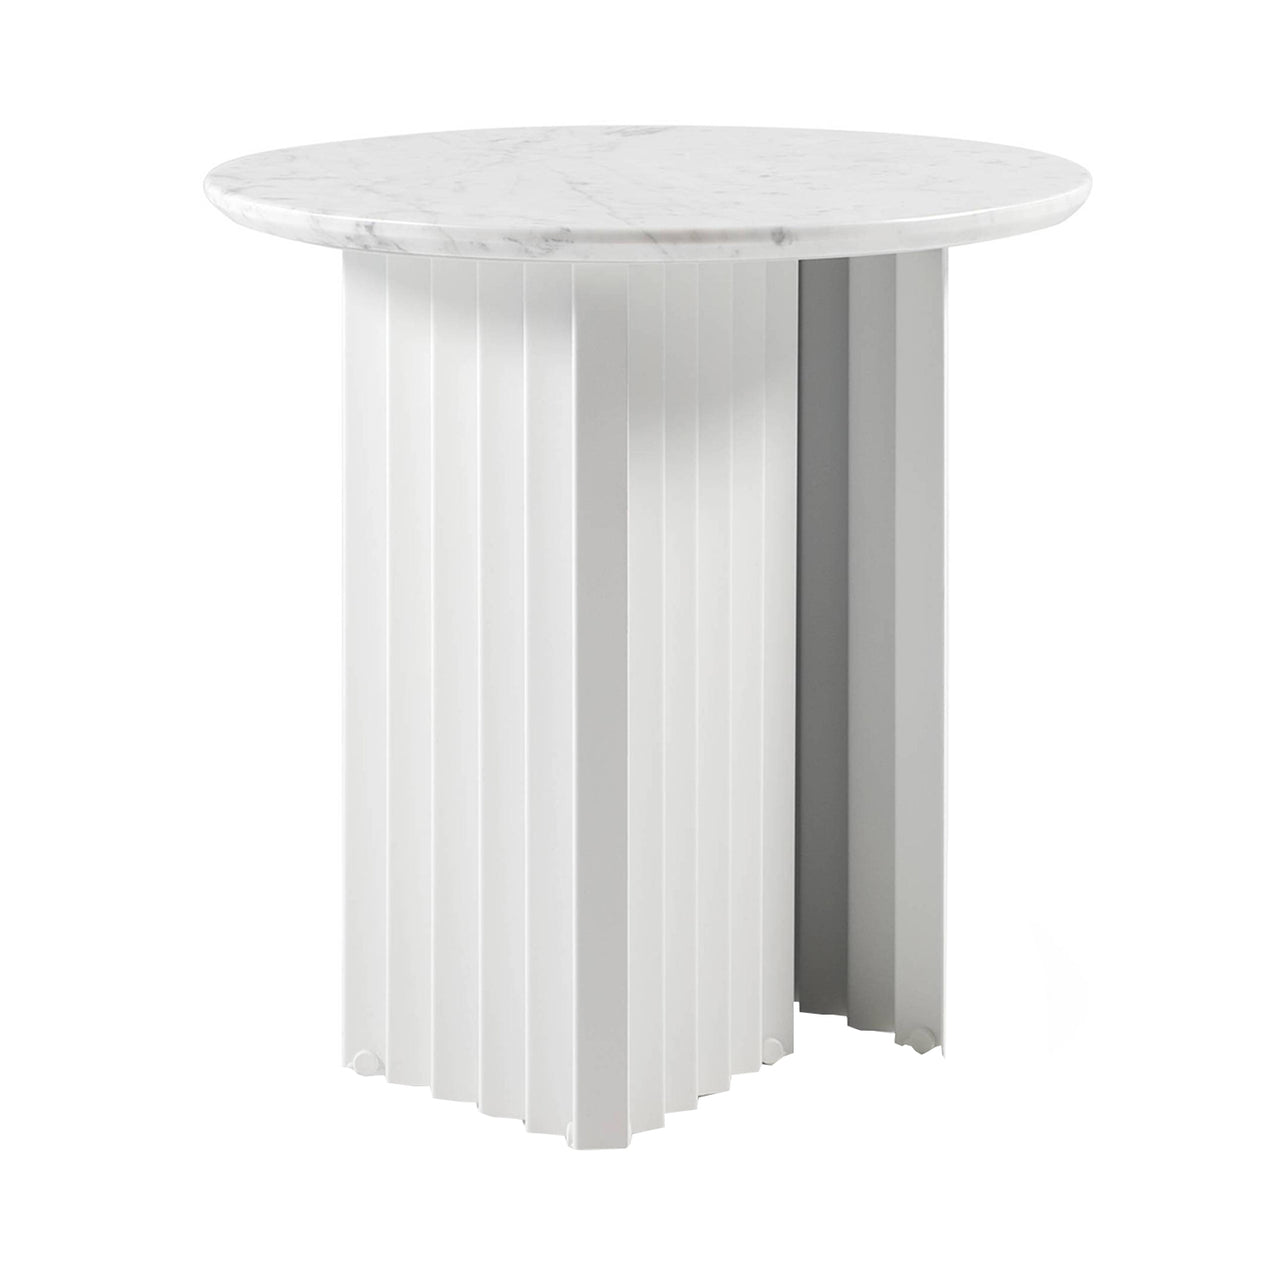 Plec Round Occasional Table: Small - 19.7